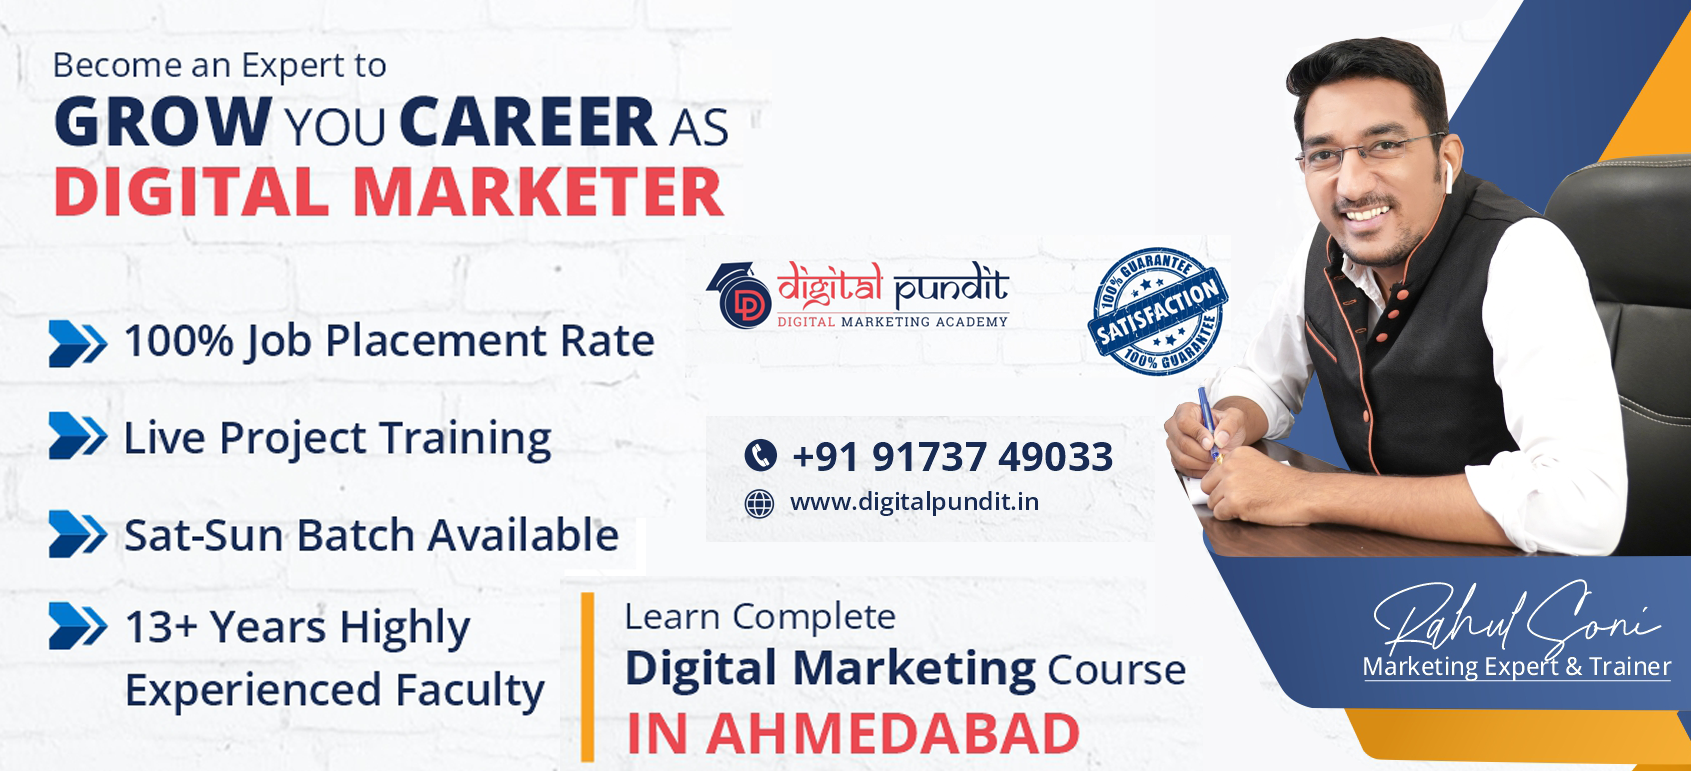 Are you from Ahmedabad and looking for top Digital Marketing Courses in Ahmedabad?